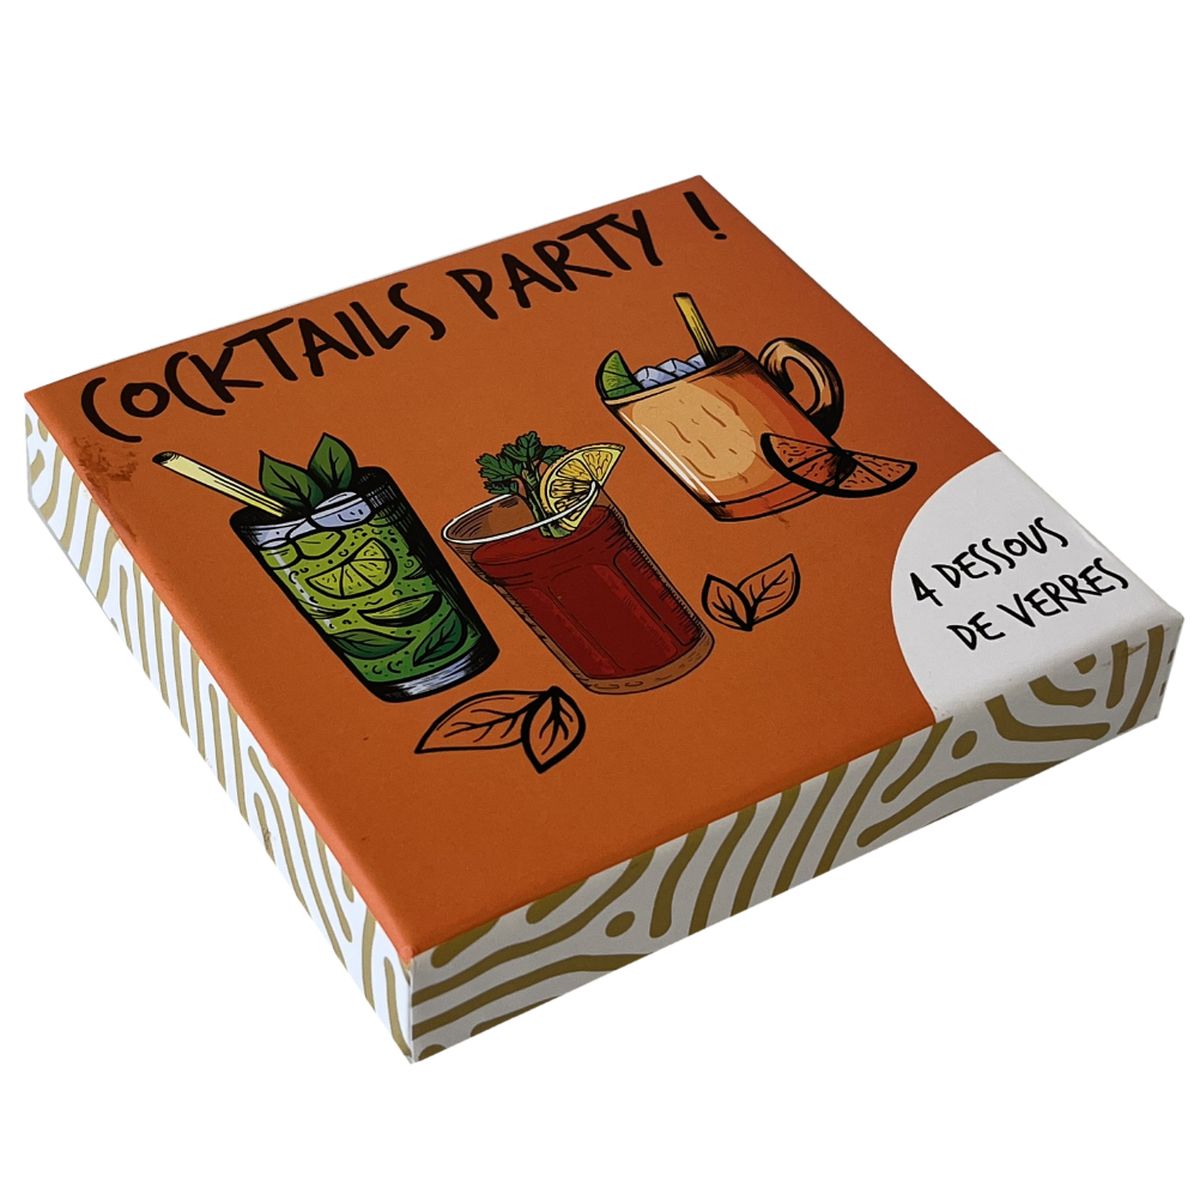 4 coasters - Party Cocktails